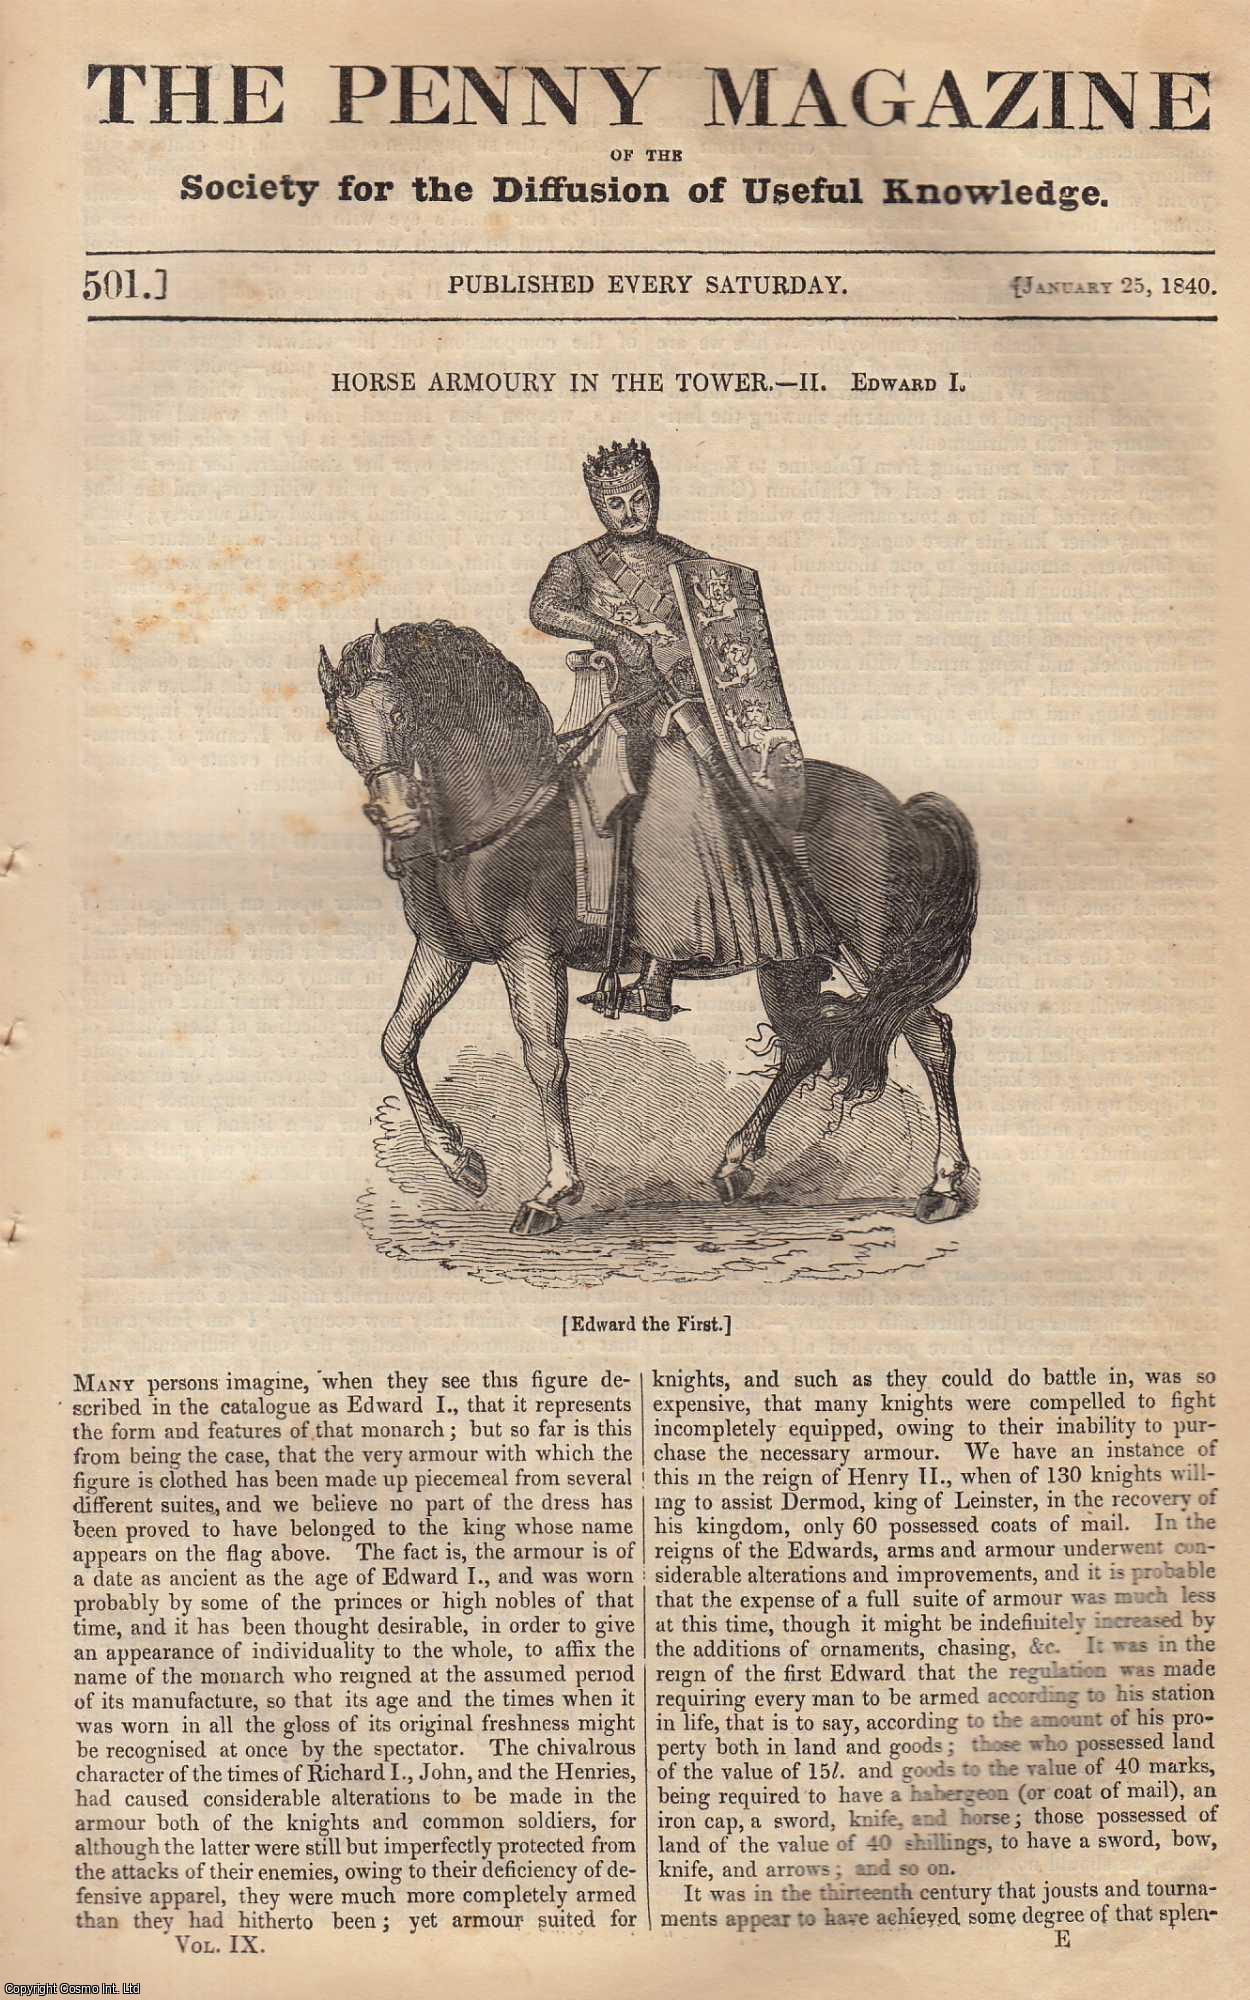 Penny Magazine - Horse Armoury (Part 2) in The Tower; Dairies and Dairying in America; Algeria; The Nature and Uses of Honey. Issue No. 501, January 25th, 1840. A complete original weekly issue of the Penny Magazine, 1840.